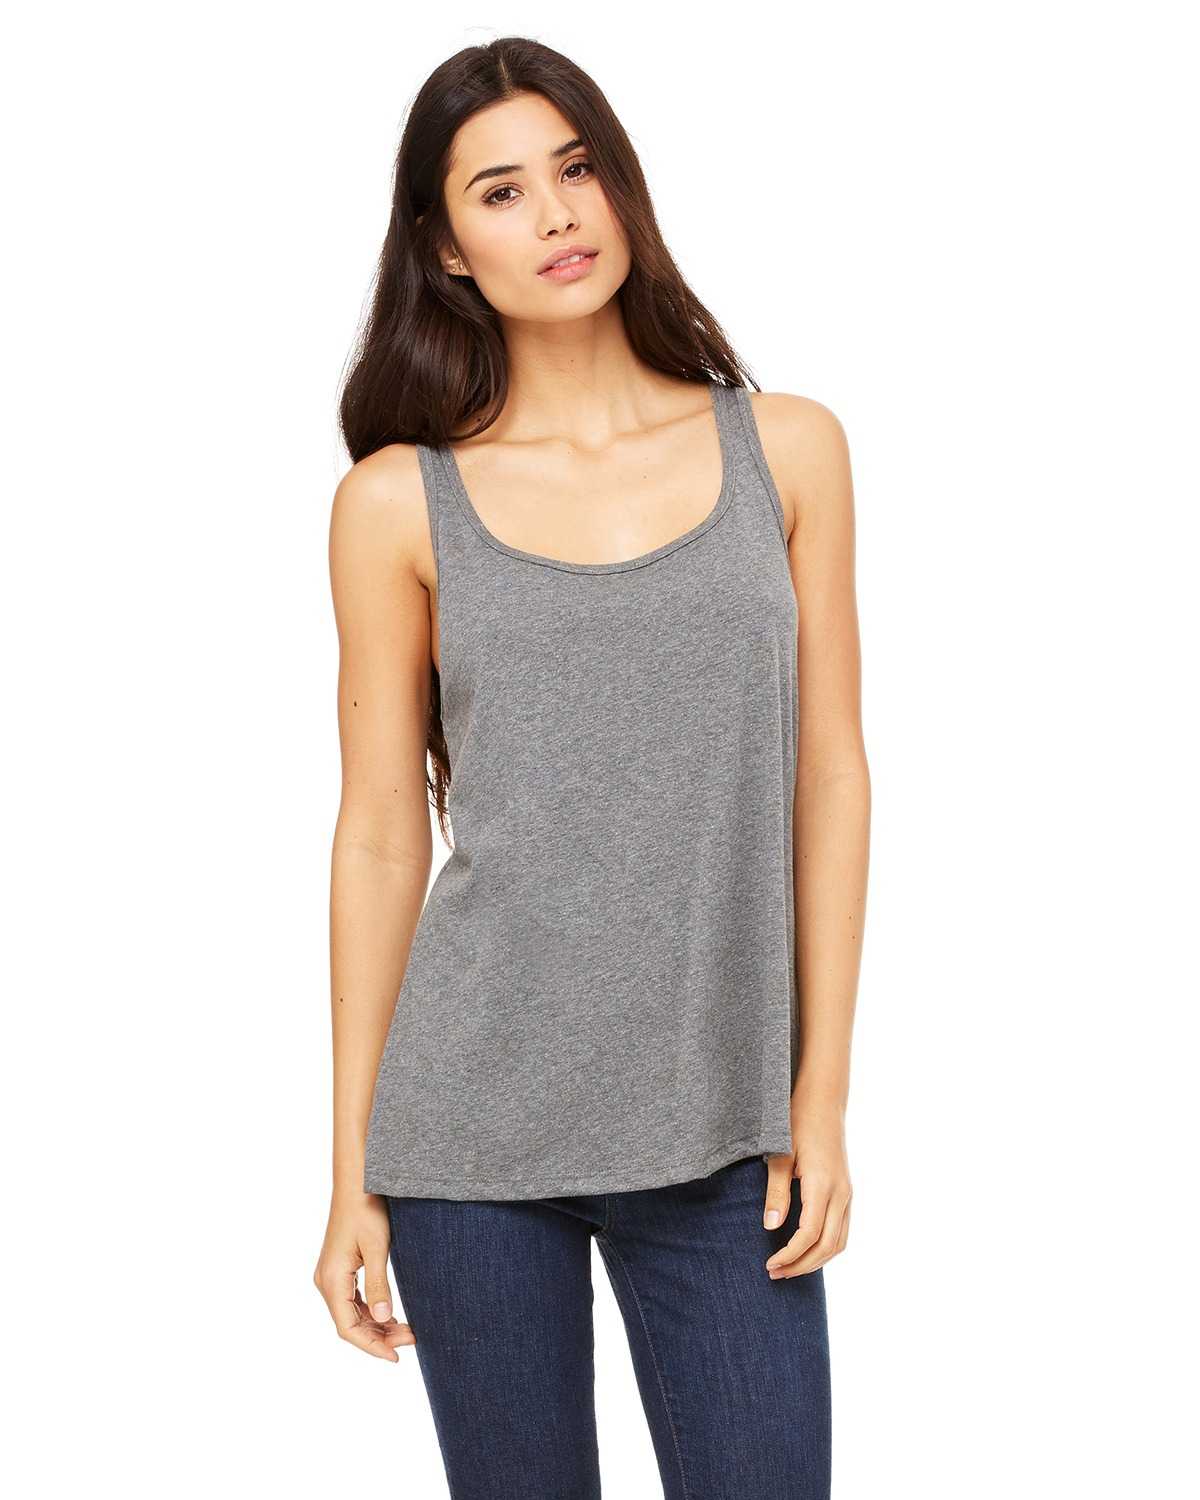 Bella + Canvas 6488 Ladies' Relaxed Jersey Tank | ApparelChoice.com